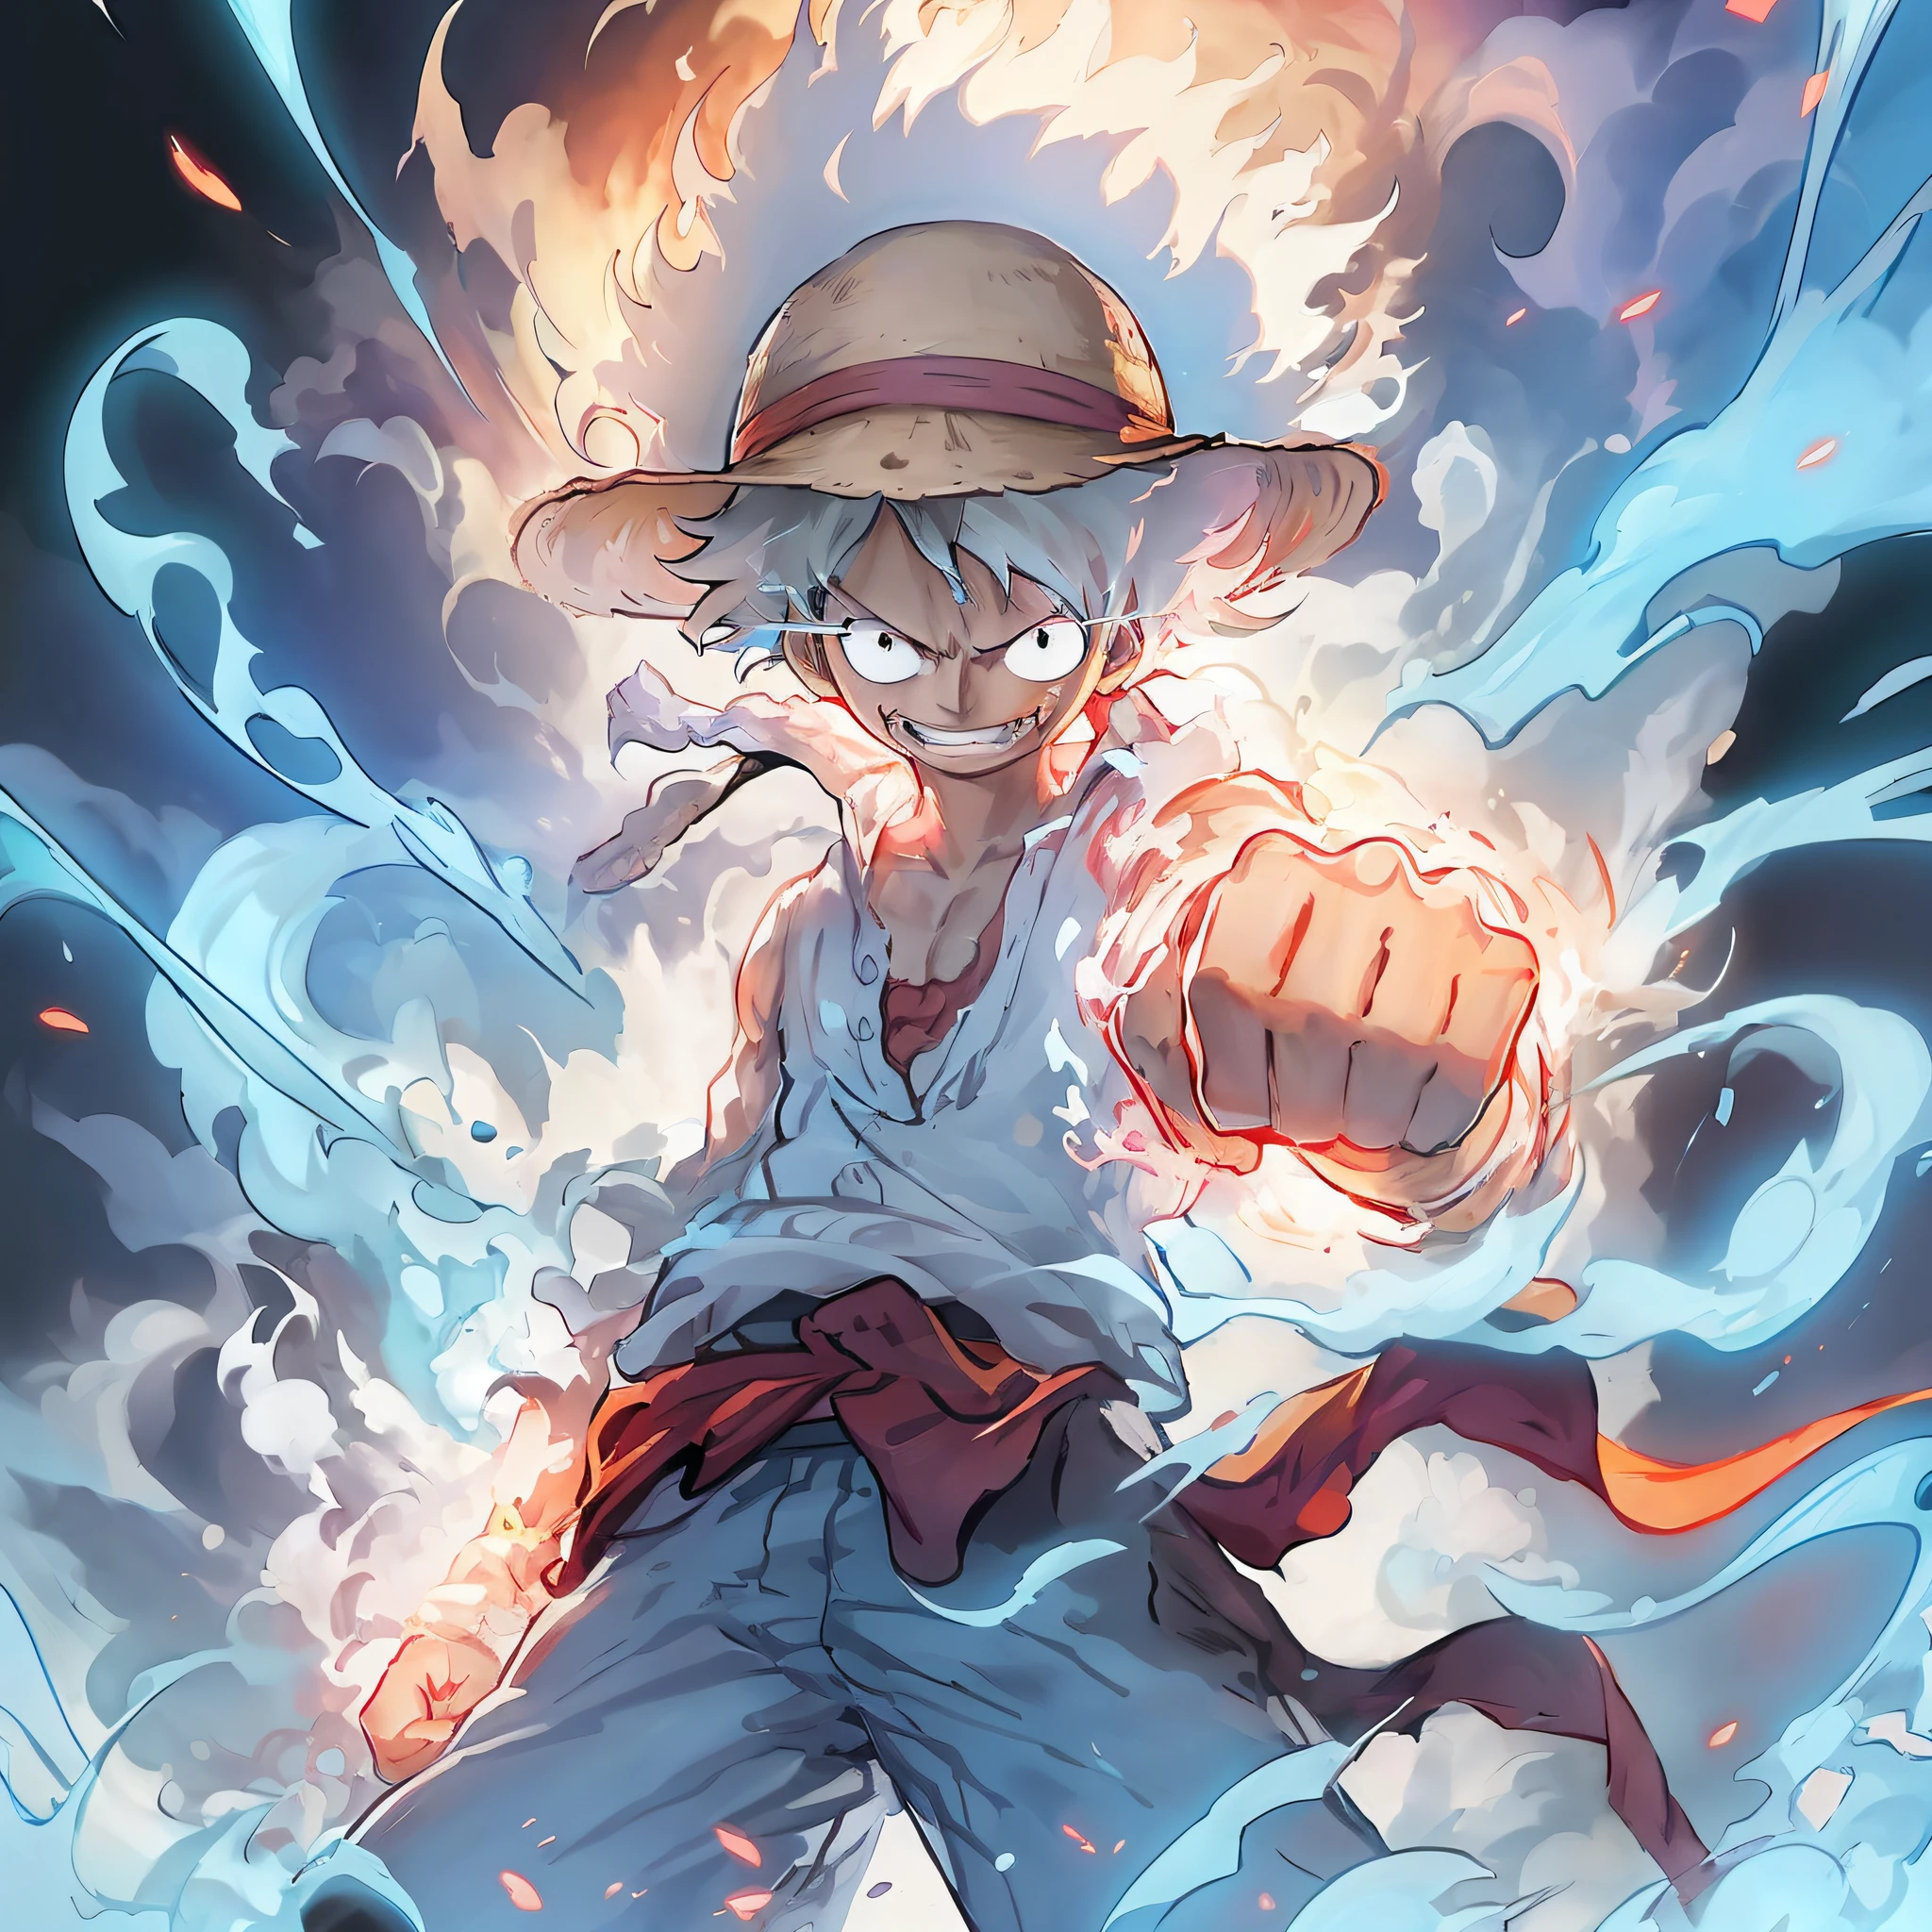 Anime characters wearing hats and fists in the air, Luffy, monkey d luffy, Luffy (One Piece, monkey d. Luffy, advanced digital anime art ”, one piece art style, Anime epic artwork, Epic anime style, luffy gear 5, epic full color illustration, from one piece, offcial art, inspired by Eiichiro Oda, hq artwork, Detailed fanart